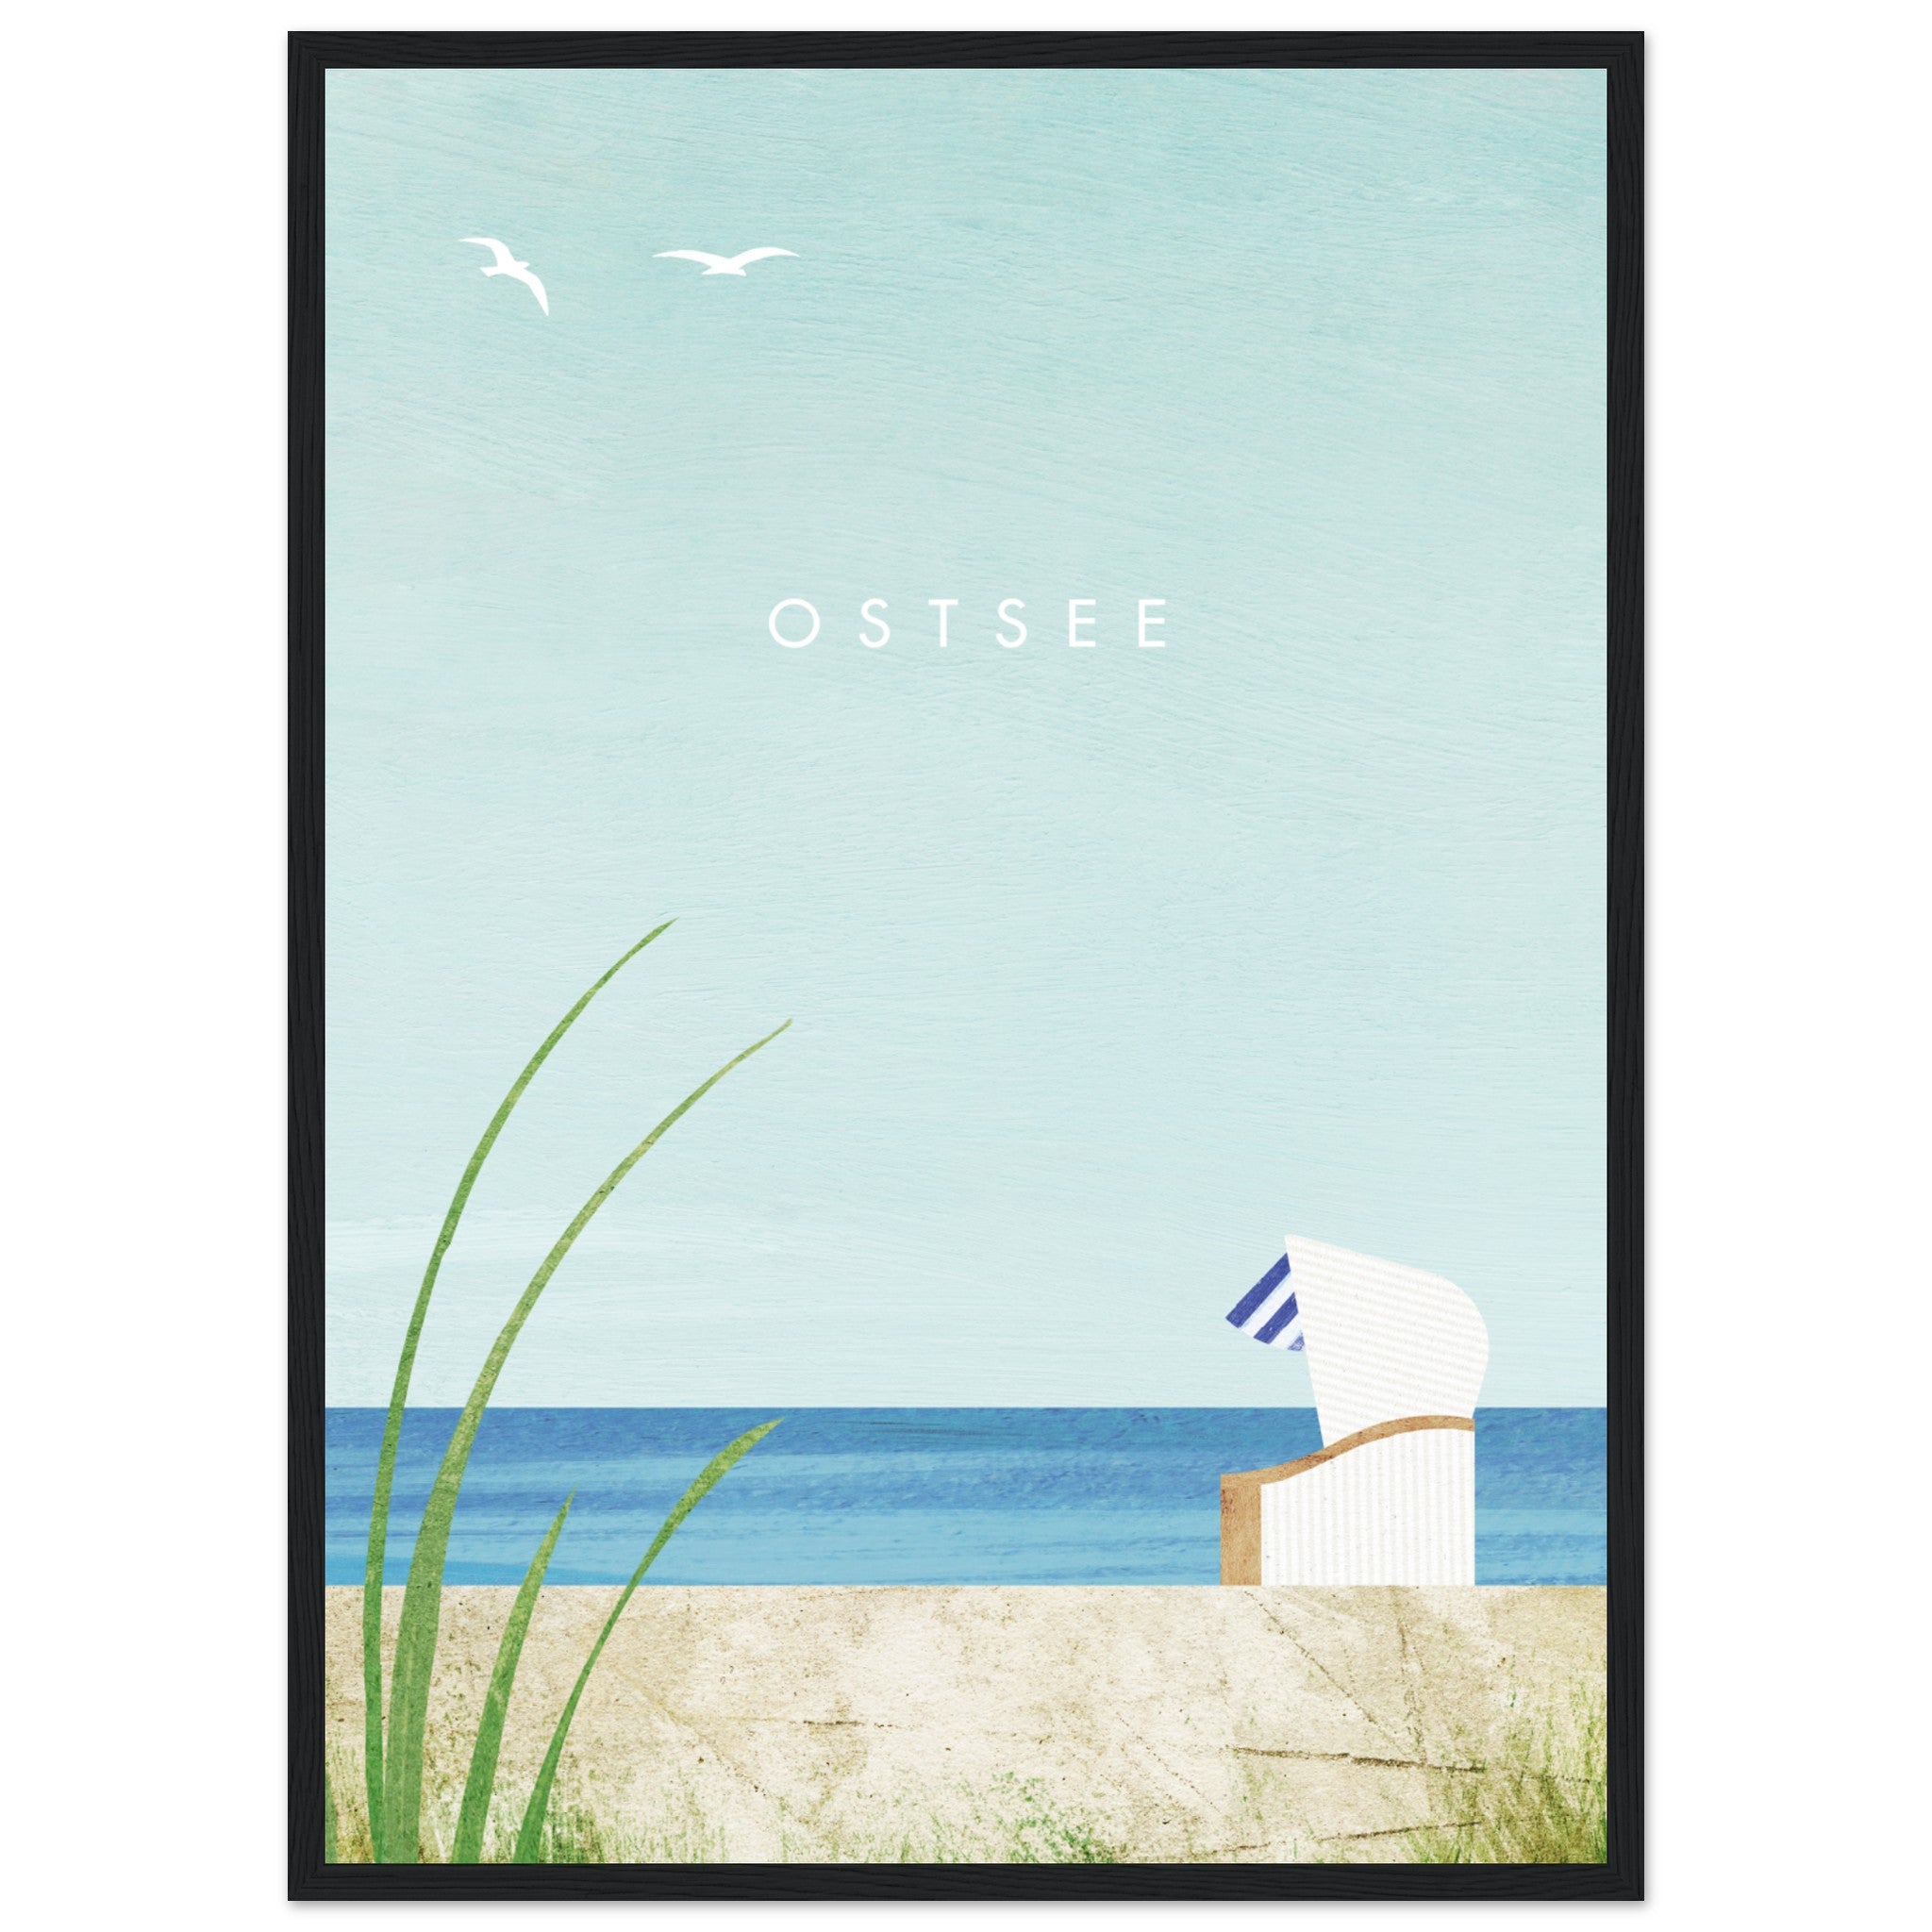 Ostsee Poster